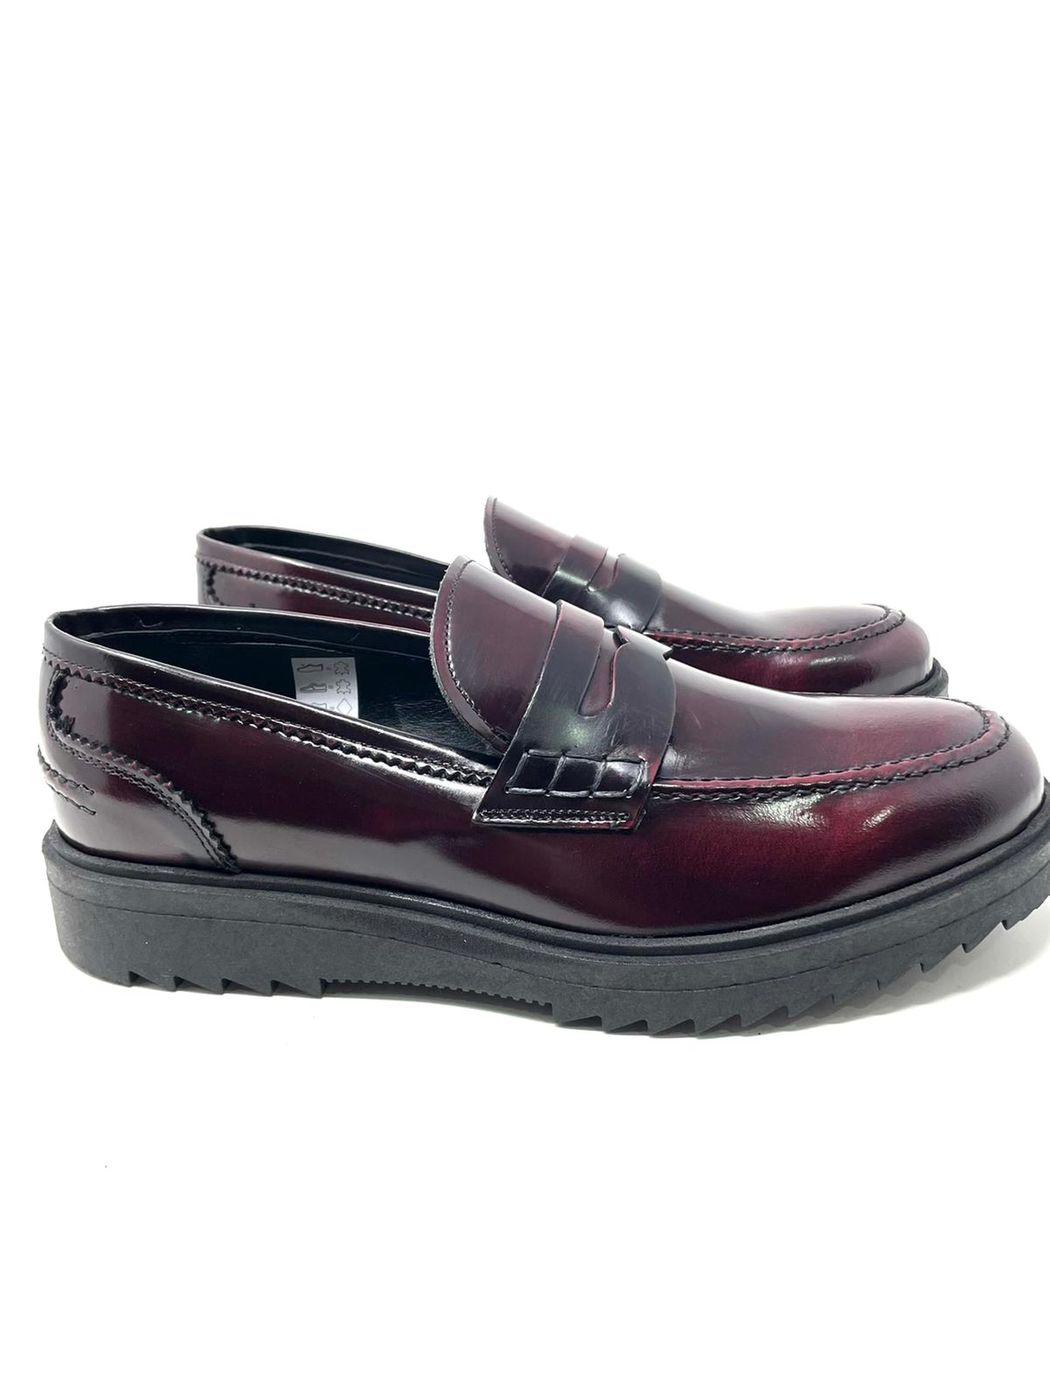 Patent moccasin with toothed rubber sole, real leather, made in Italy 